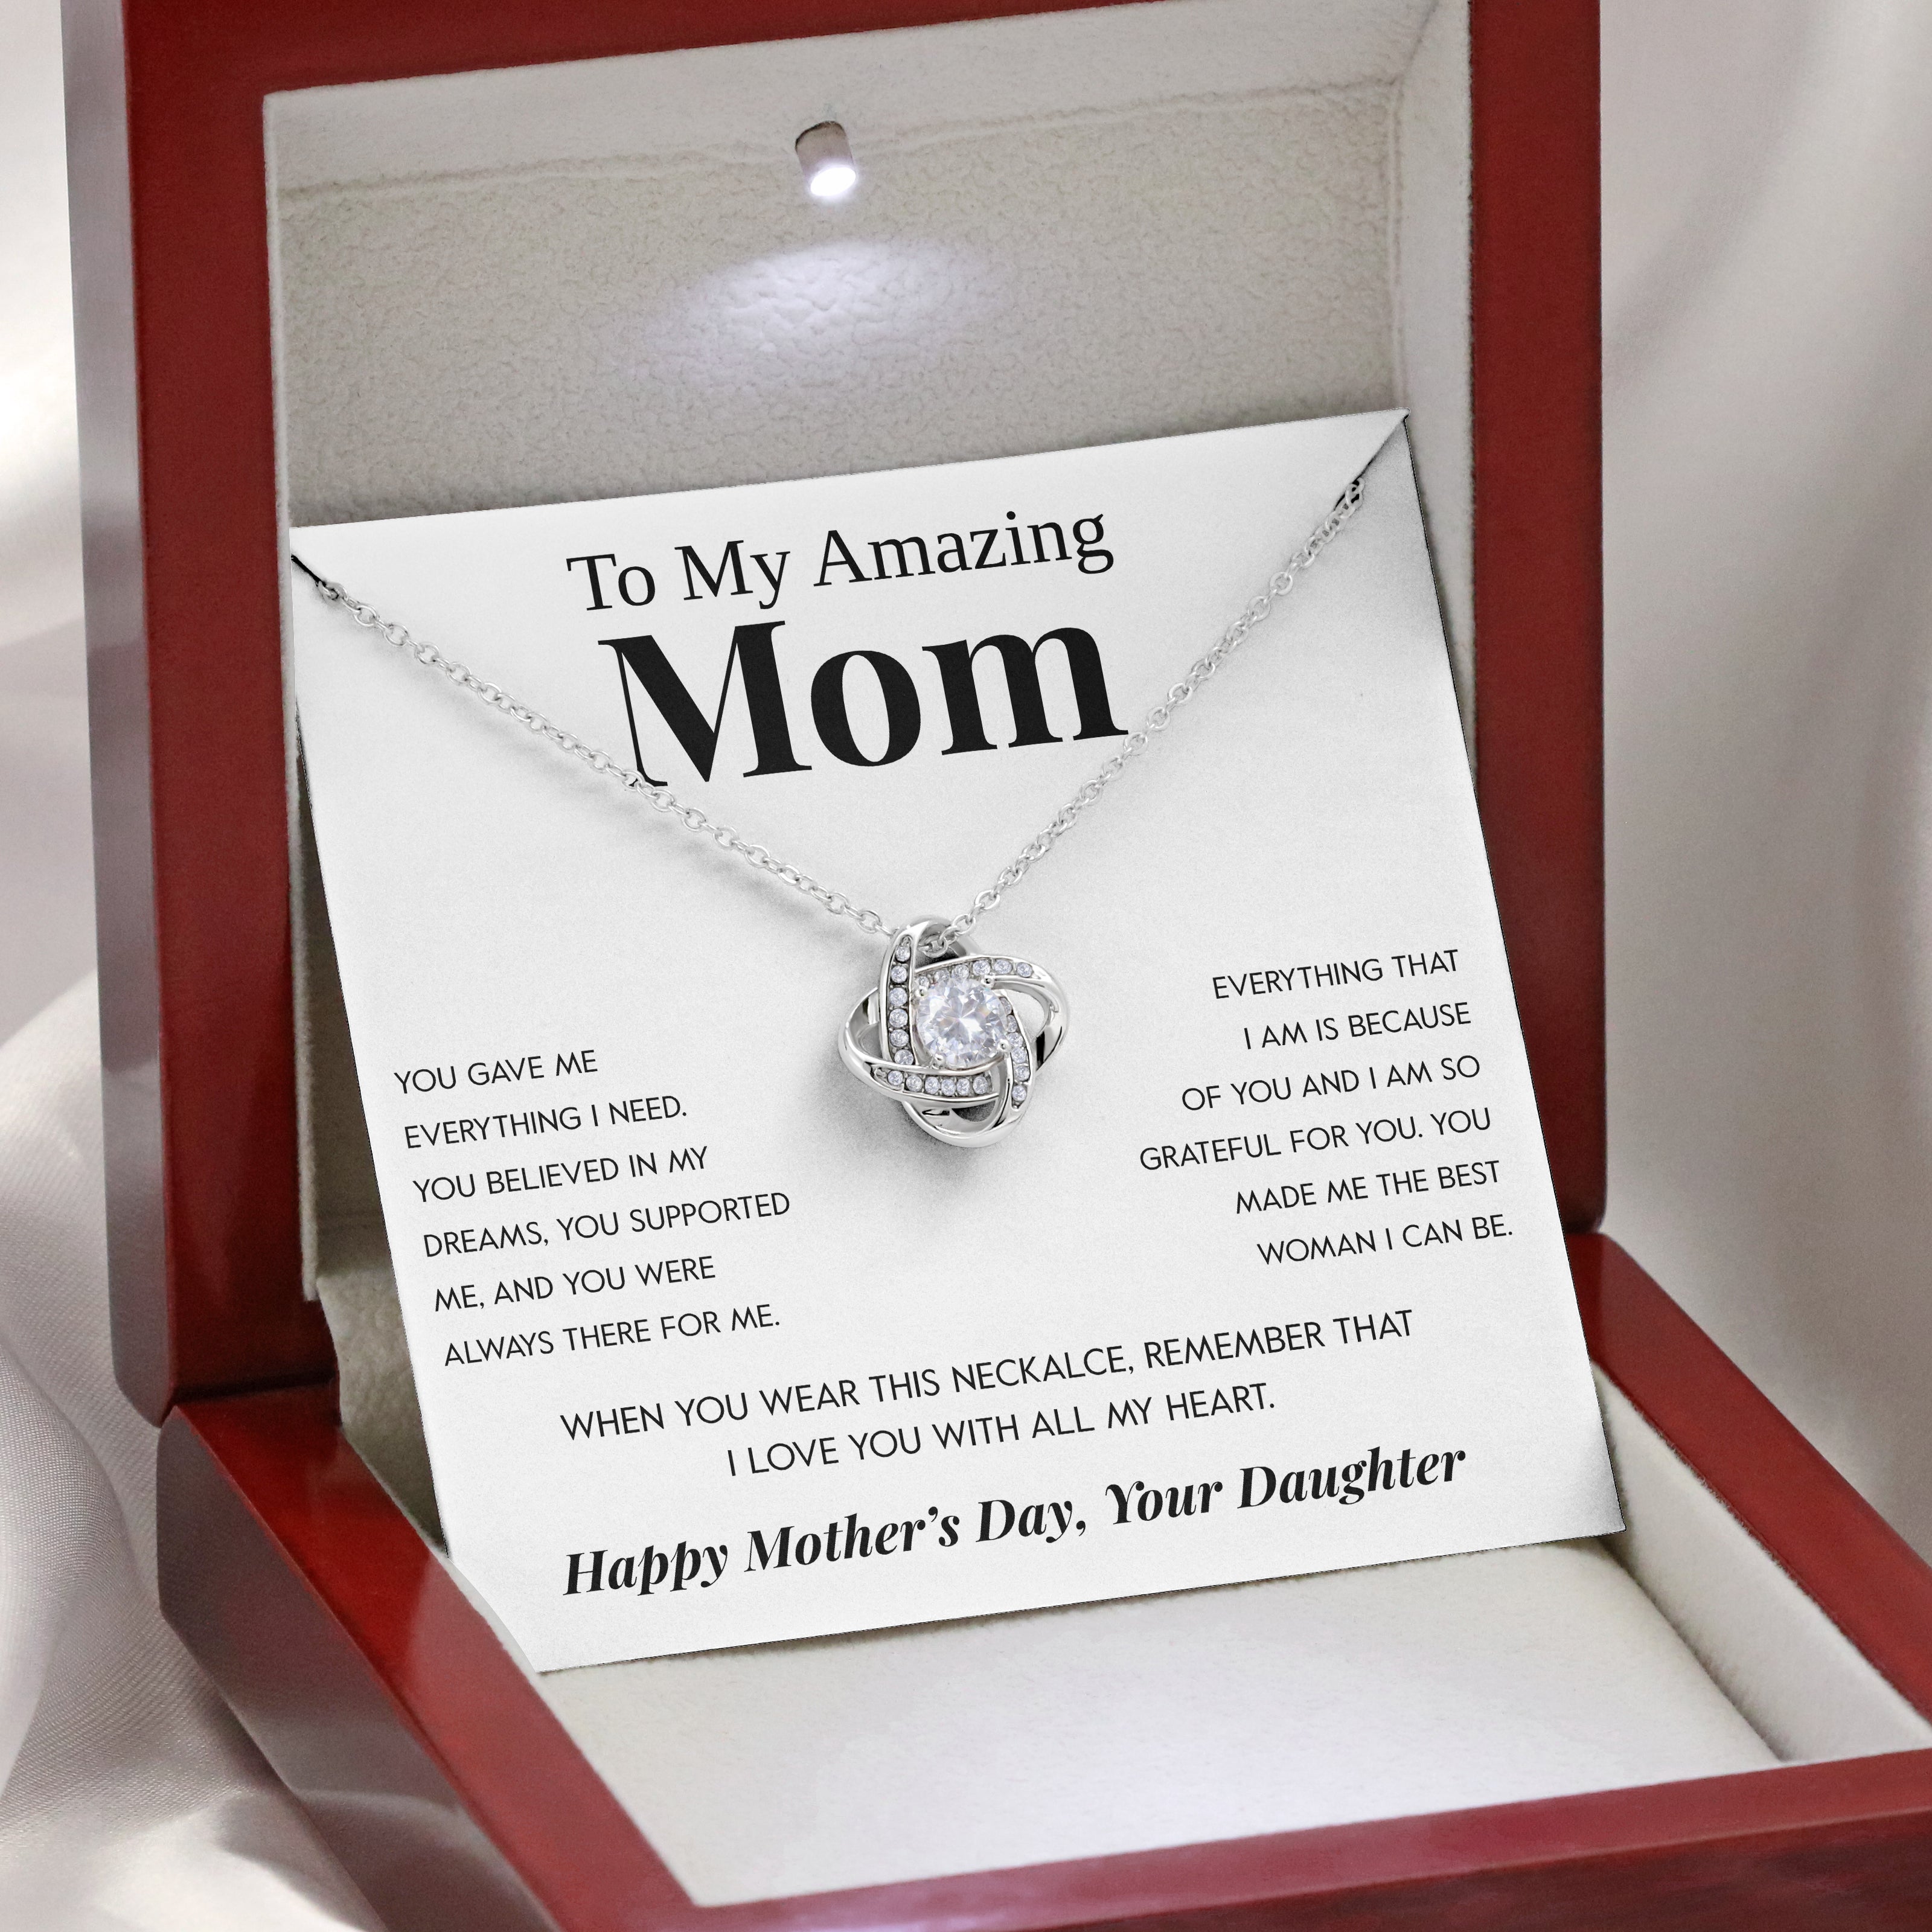 To My Mom | "Everything I Need" | Love Knot Necklace